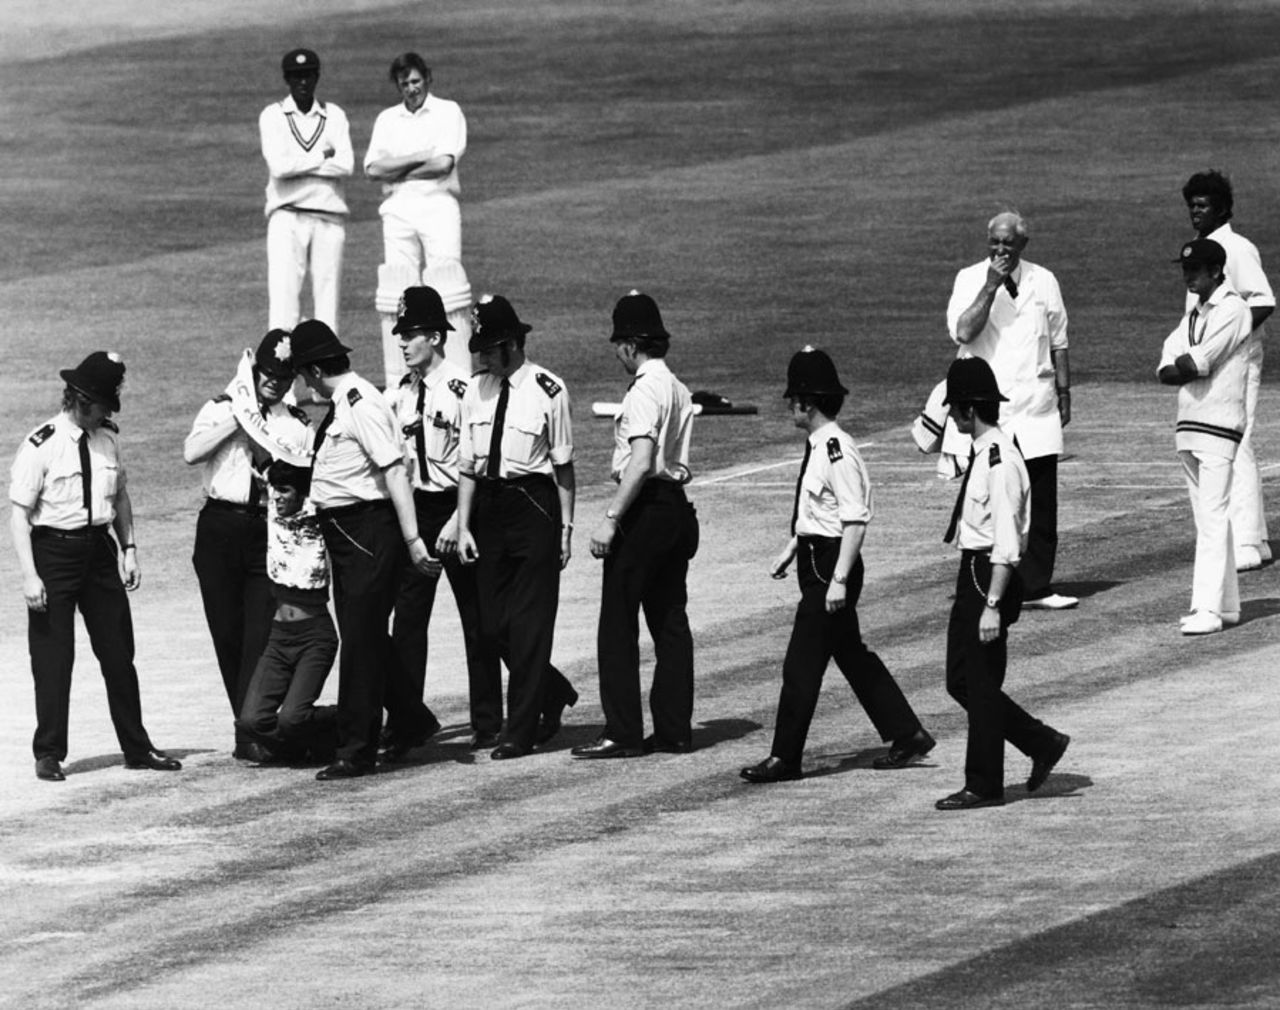 Police escort a group of demonstrators off the pitch, Australia v Sri Lanka, World Cup, The Oval, June 11, 1975